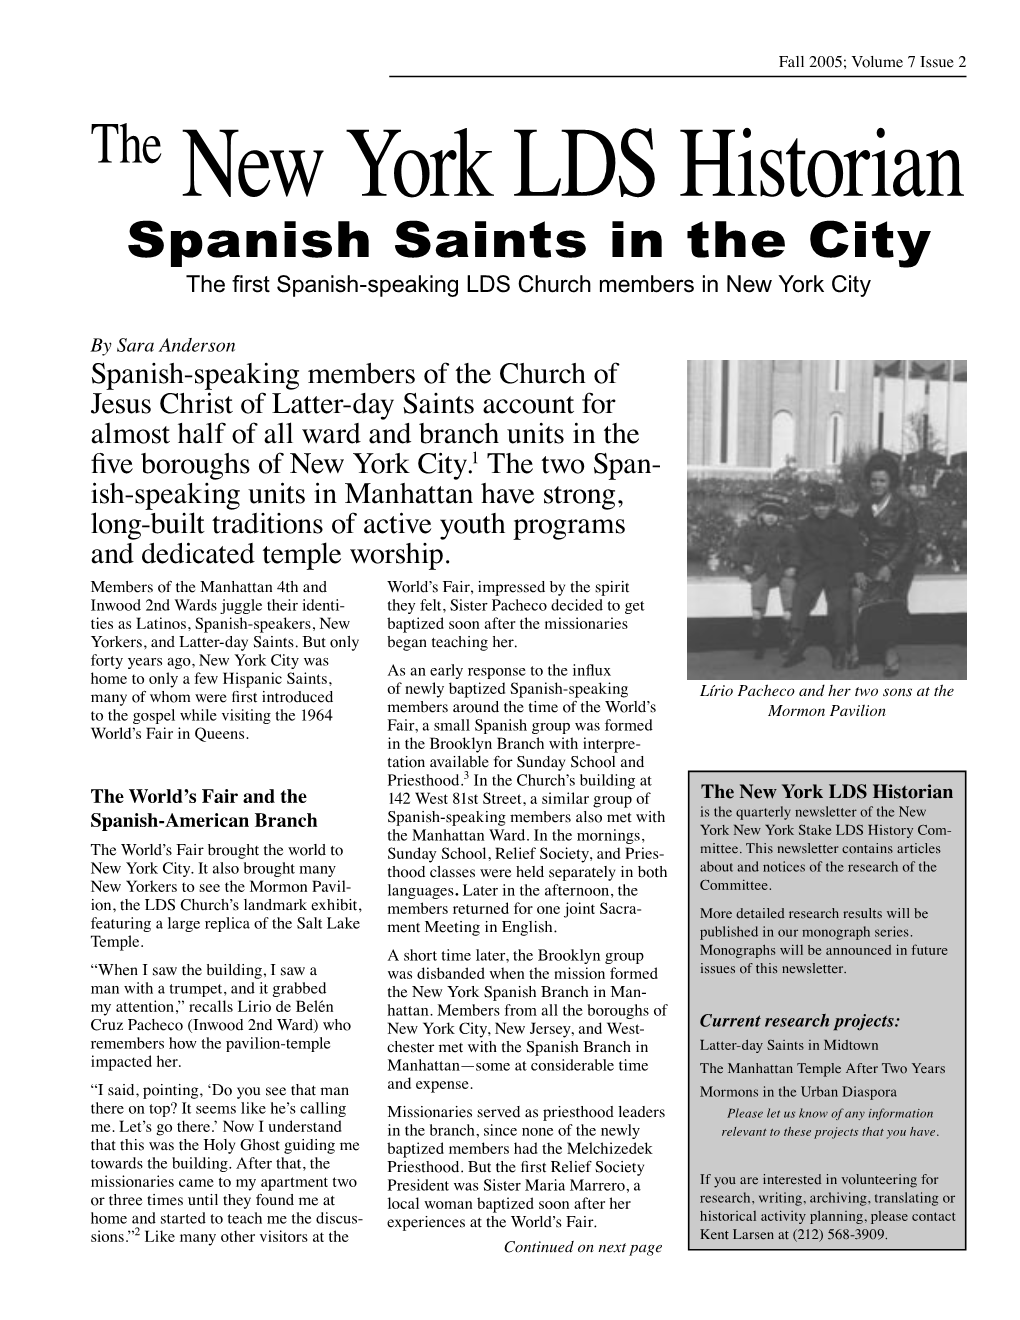 The New York LDS Historian Spanish Saints in the City the ﬁrst Spanish-Speaking LDS Church Members in New York City